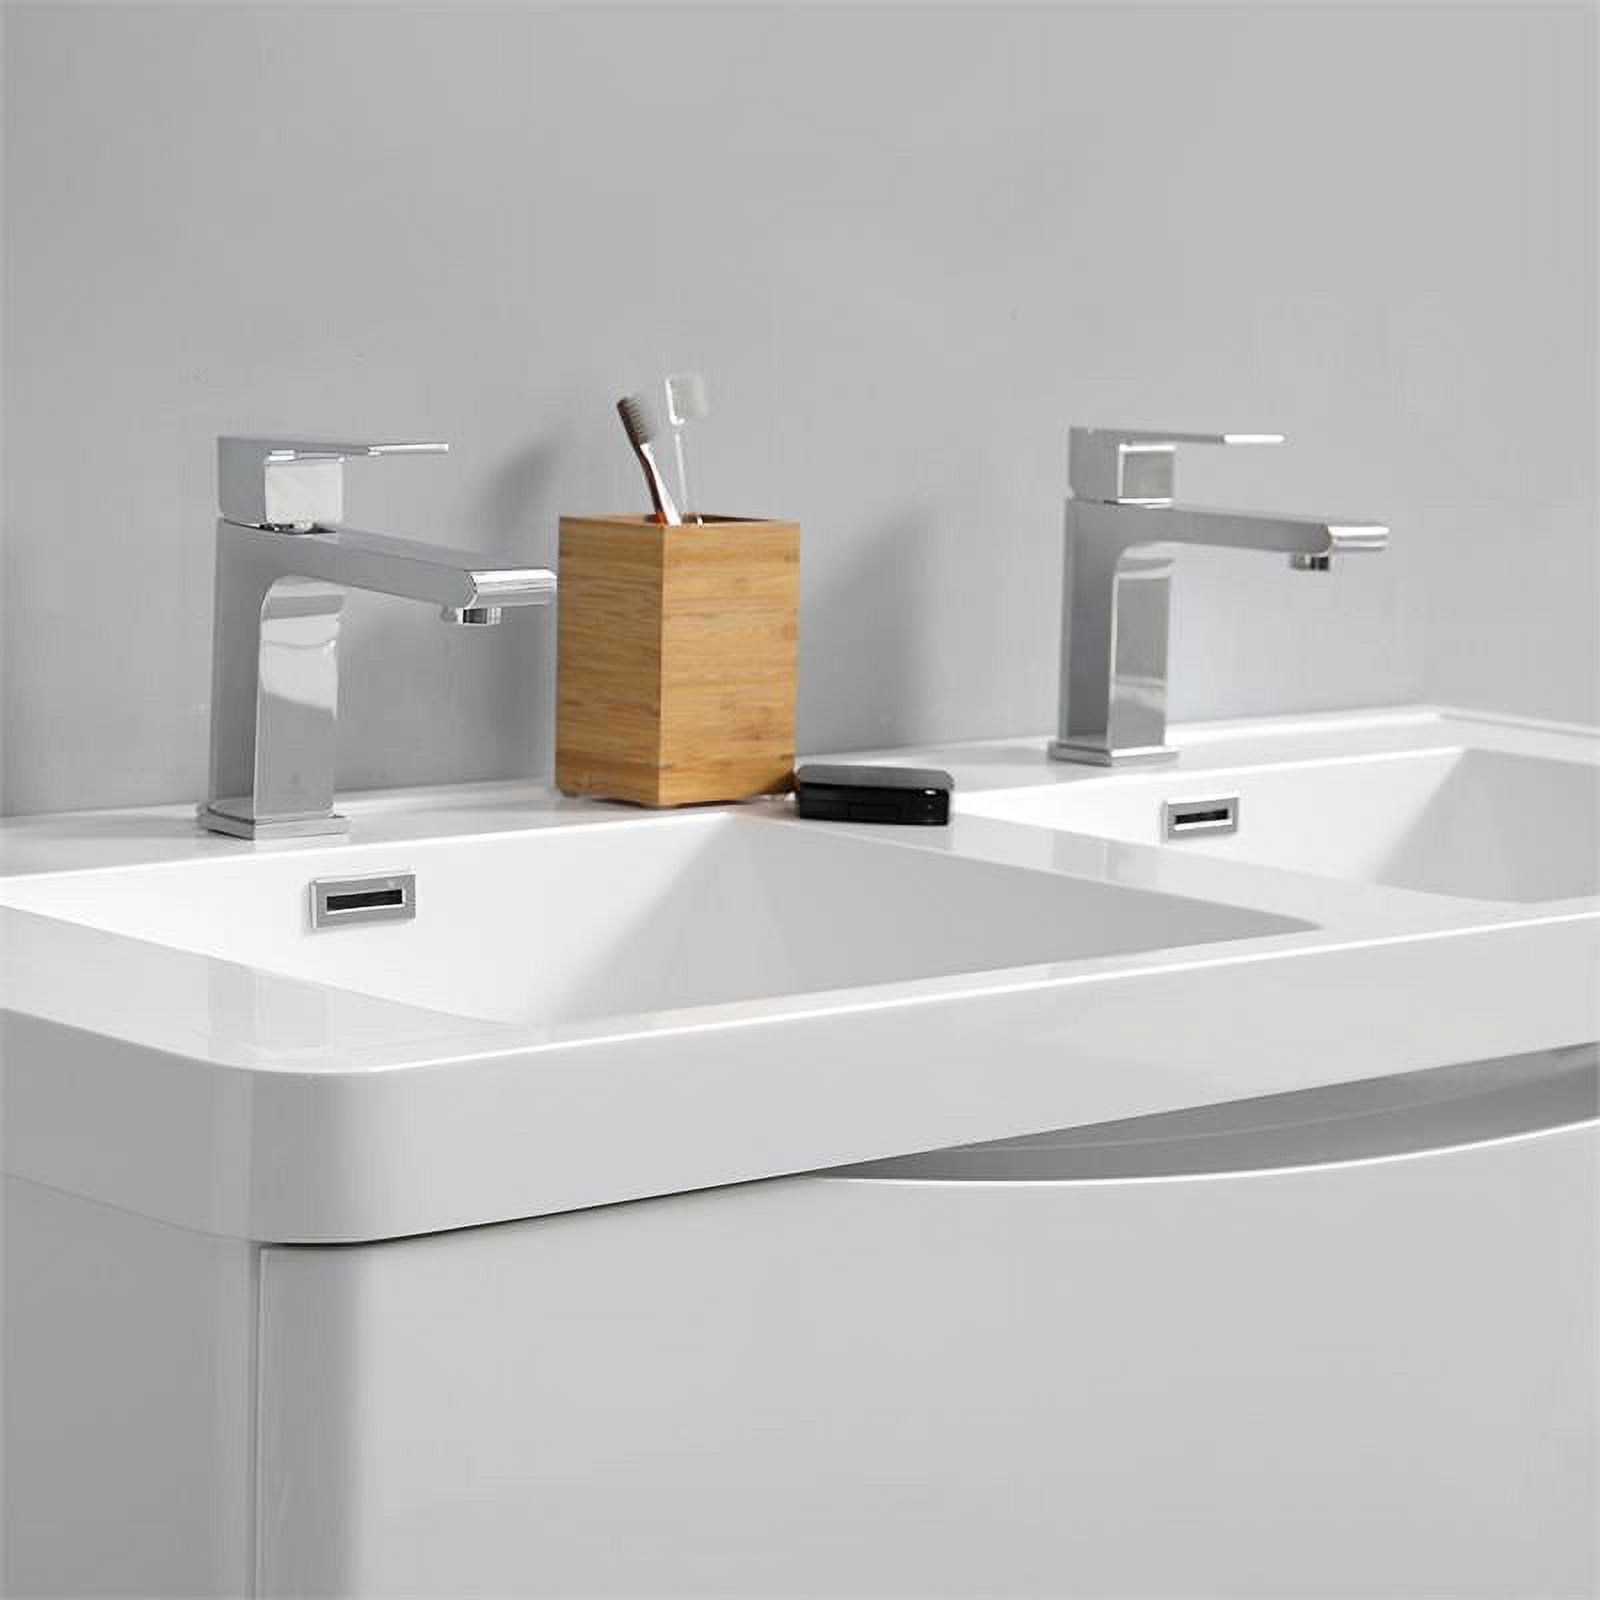 Fresca Tuscany 48" Wood Bathroom Vanity with Double Sinks in Glossy White - image 5 of 8